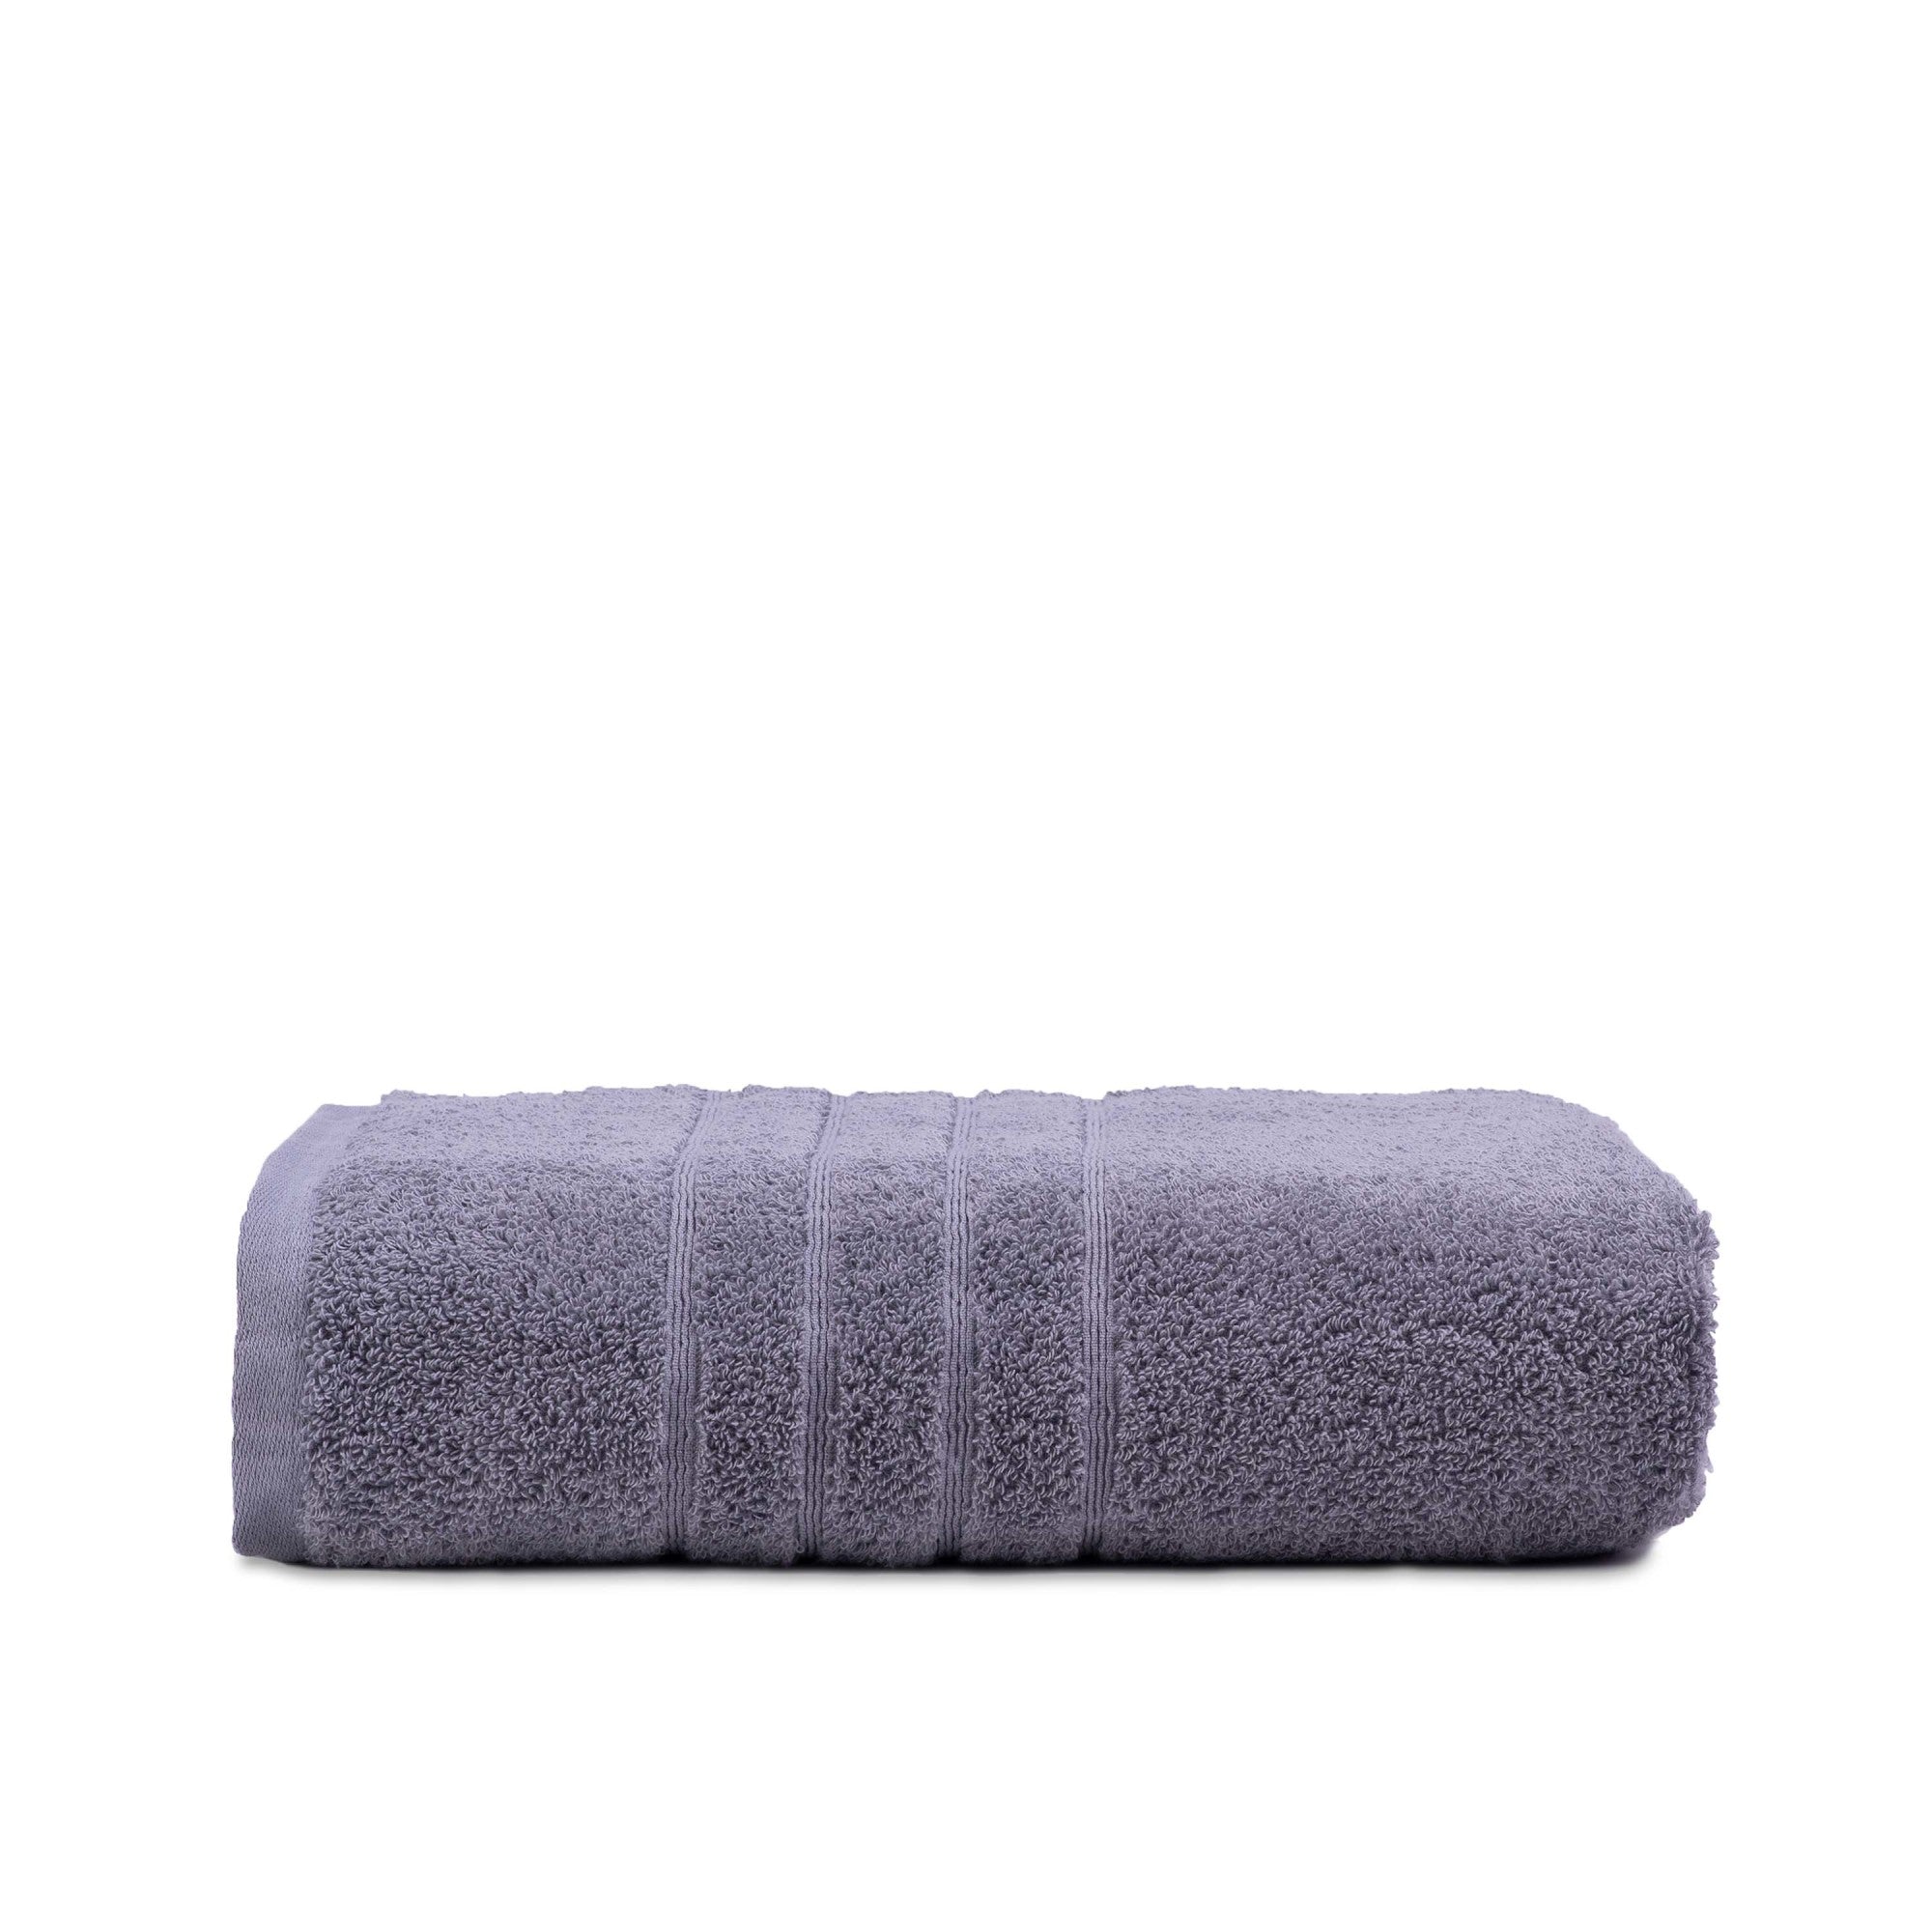 YMMV: A Couple Towel SKU's Currently On Deep Clearance Online : r/Costco